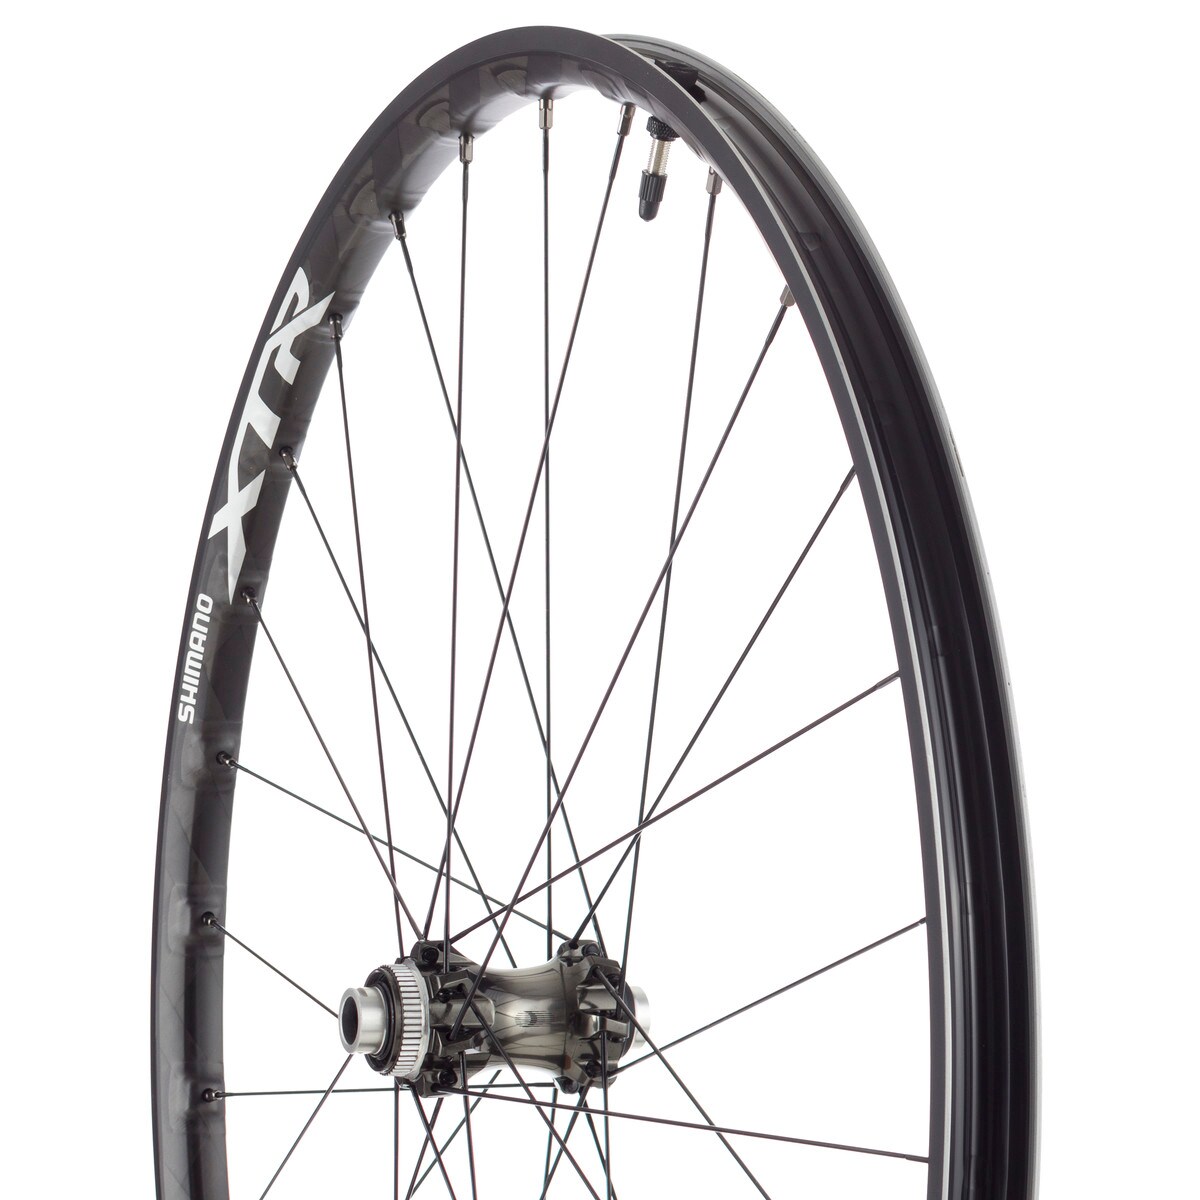 Shimano XTR WH M9020 TL 29in Wheelset